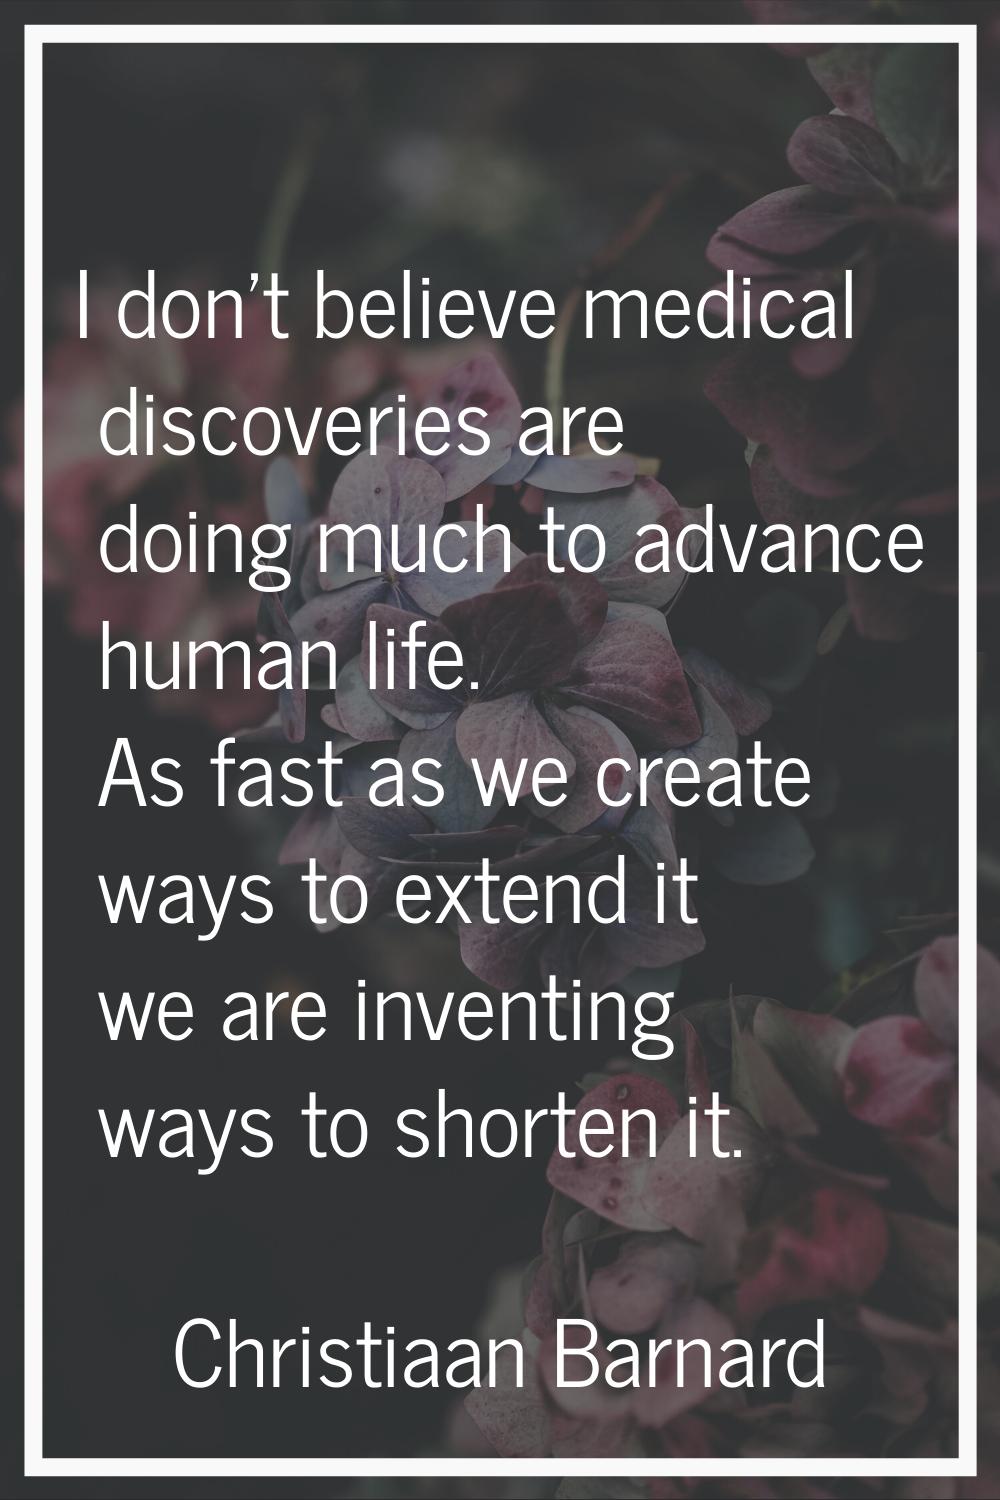 I don't believe medical discoveries are doing much to advance human life. As fast as we create ways